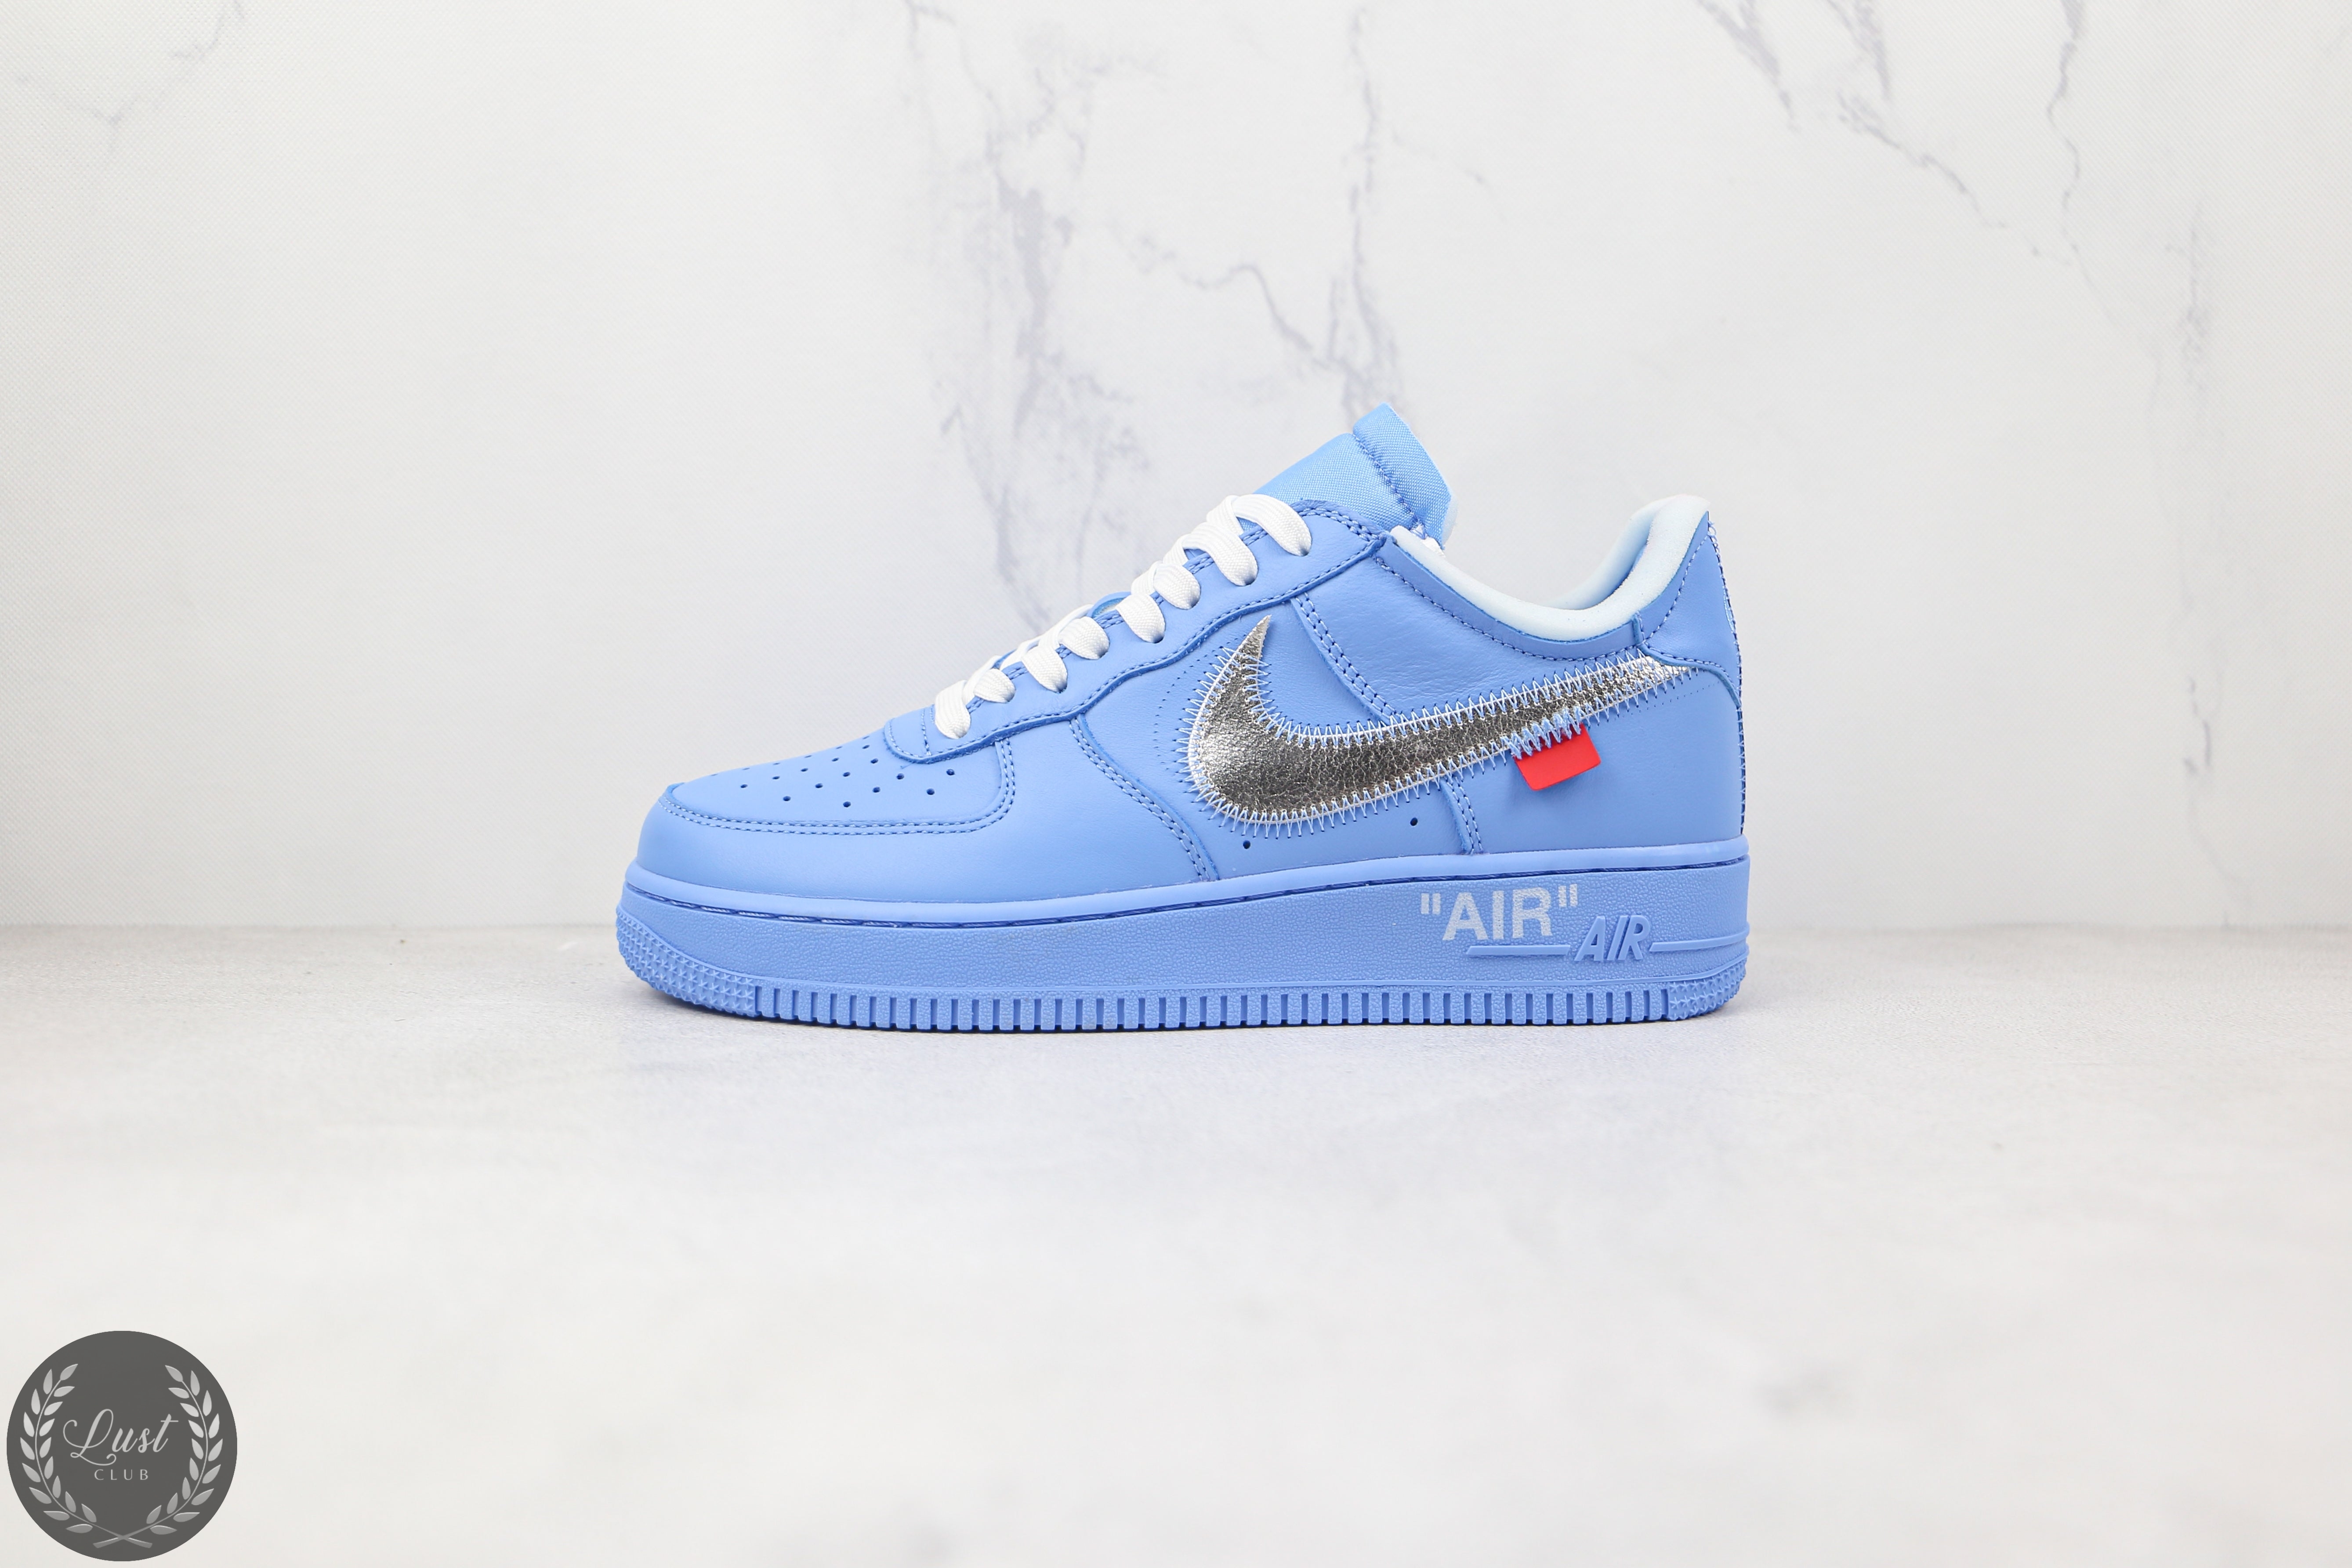 Nike Air Force 1 low off-white mca blue